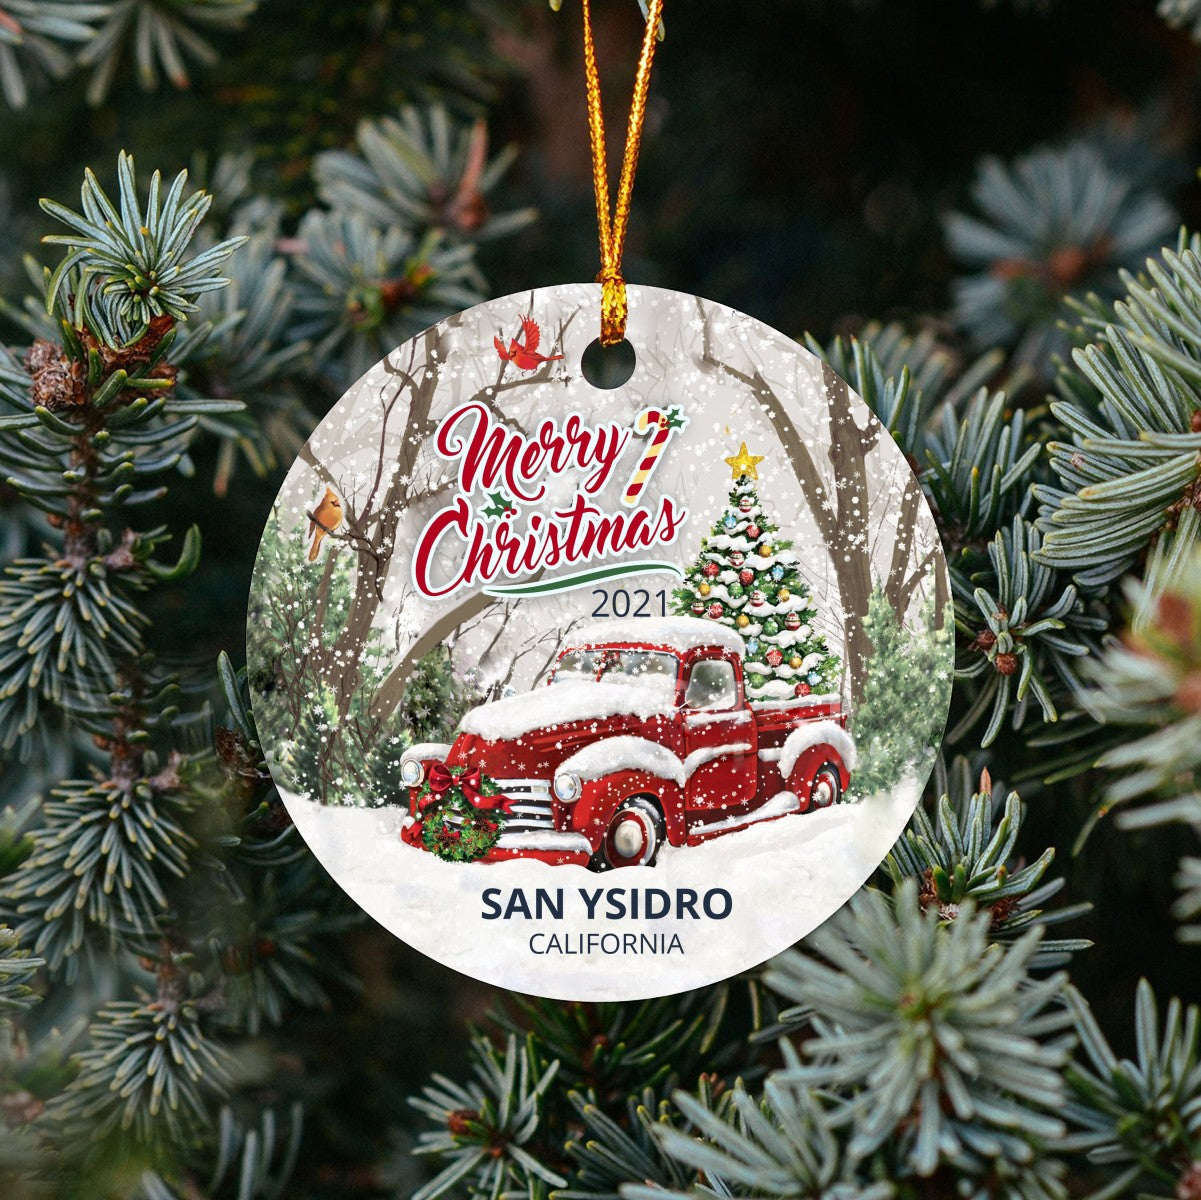 Christmas Tree Ornaments San Ysidro - Ornament With Name City, State San Ysidro California CA Ornament - Red Truck Xmas Ornaments 3'' Plastic Gift For Family, Friend And Housewarming